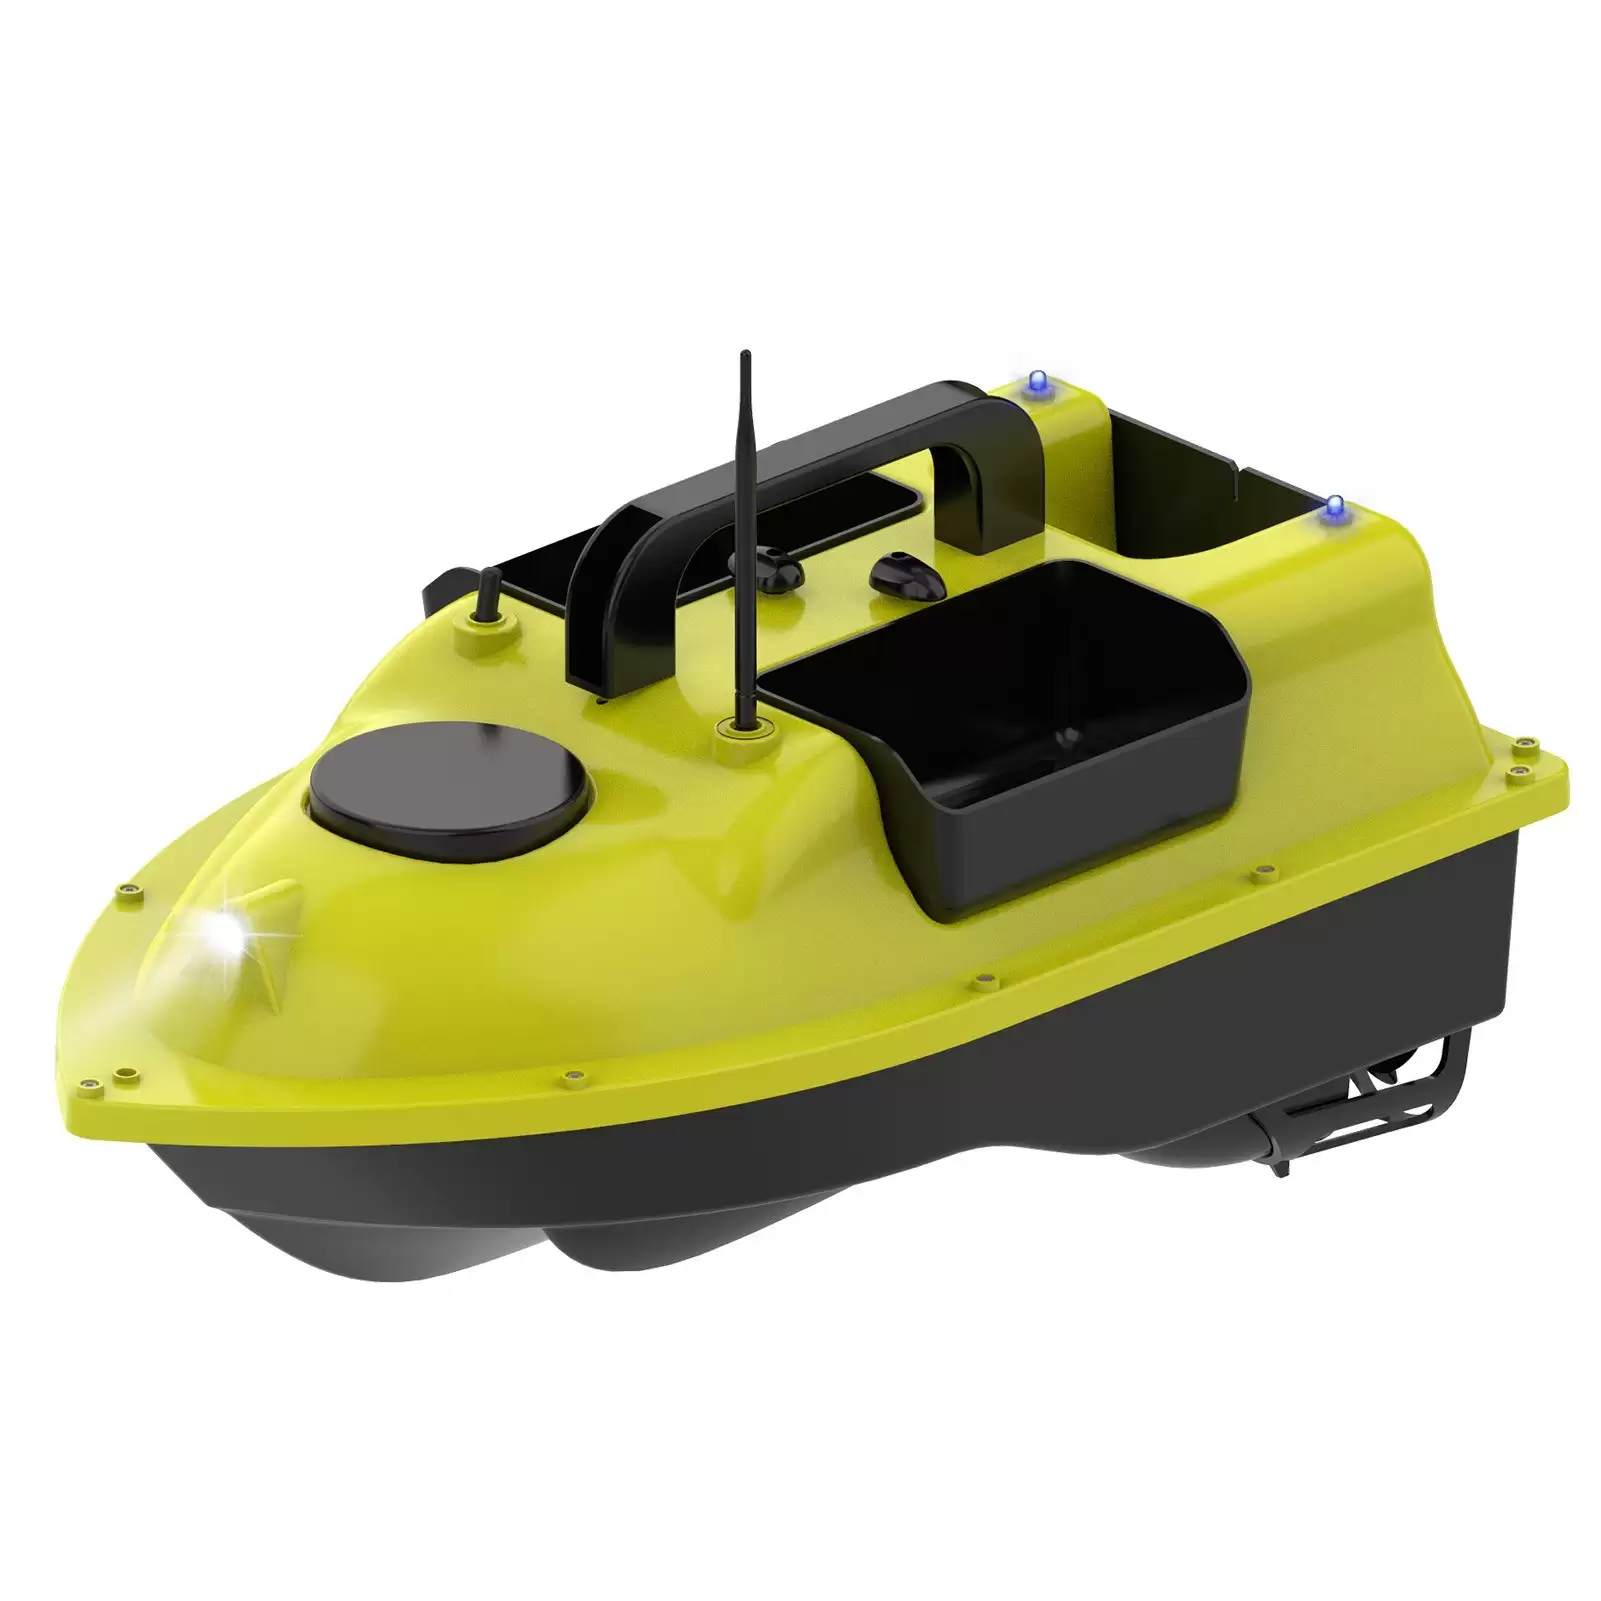 Order In Just $159.99 [Eu Only] Gps Fishing Bait Boat With 3 Bait Containers At Tomtop